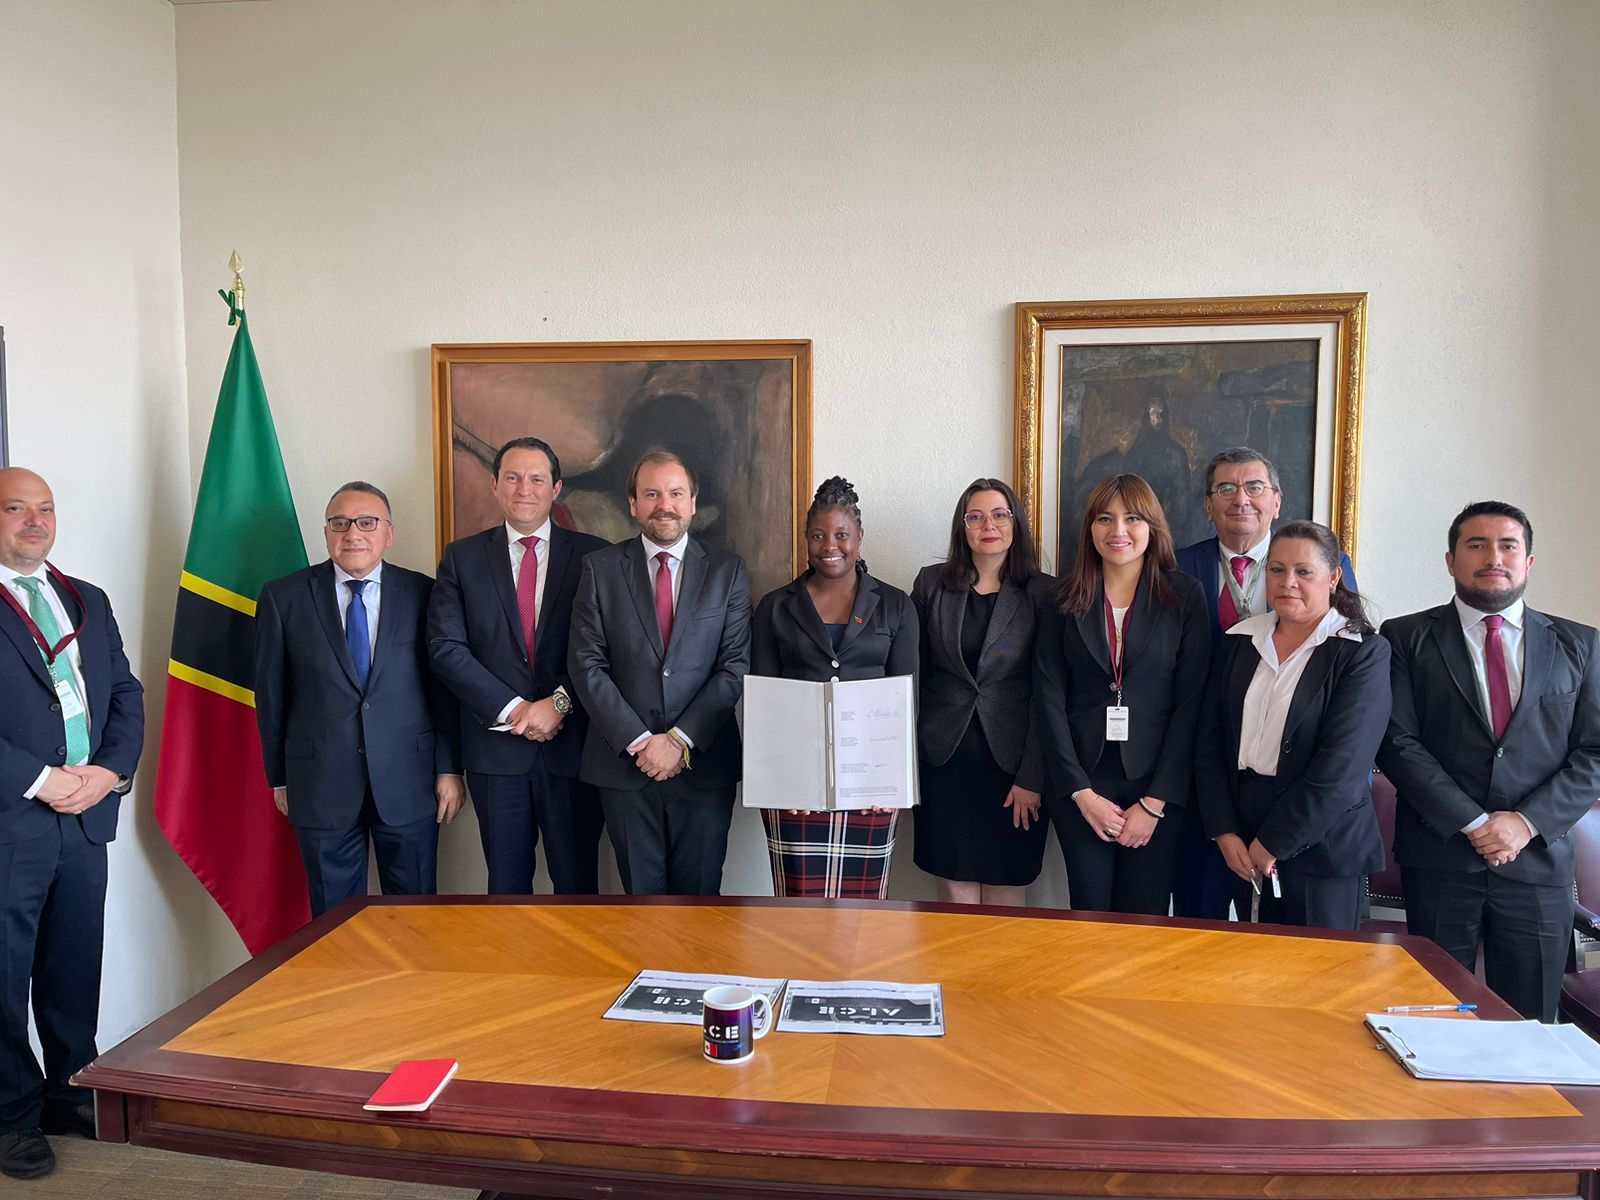 Saint Kitts and Nevis signs the Constitutive Agreement of ALCE